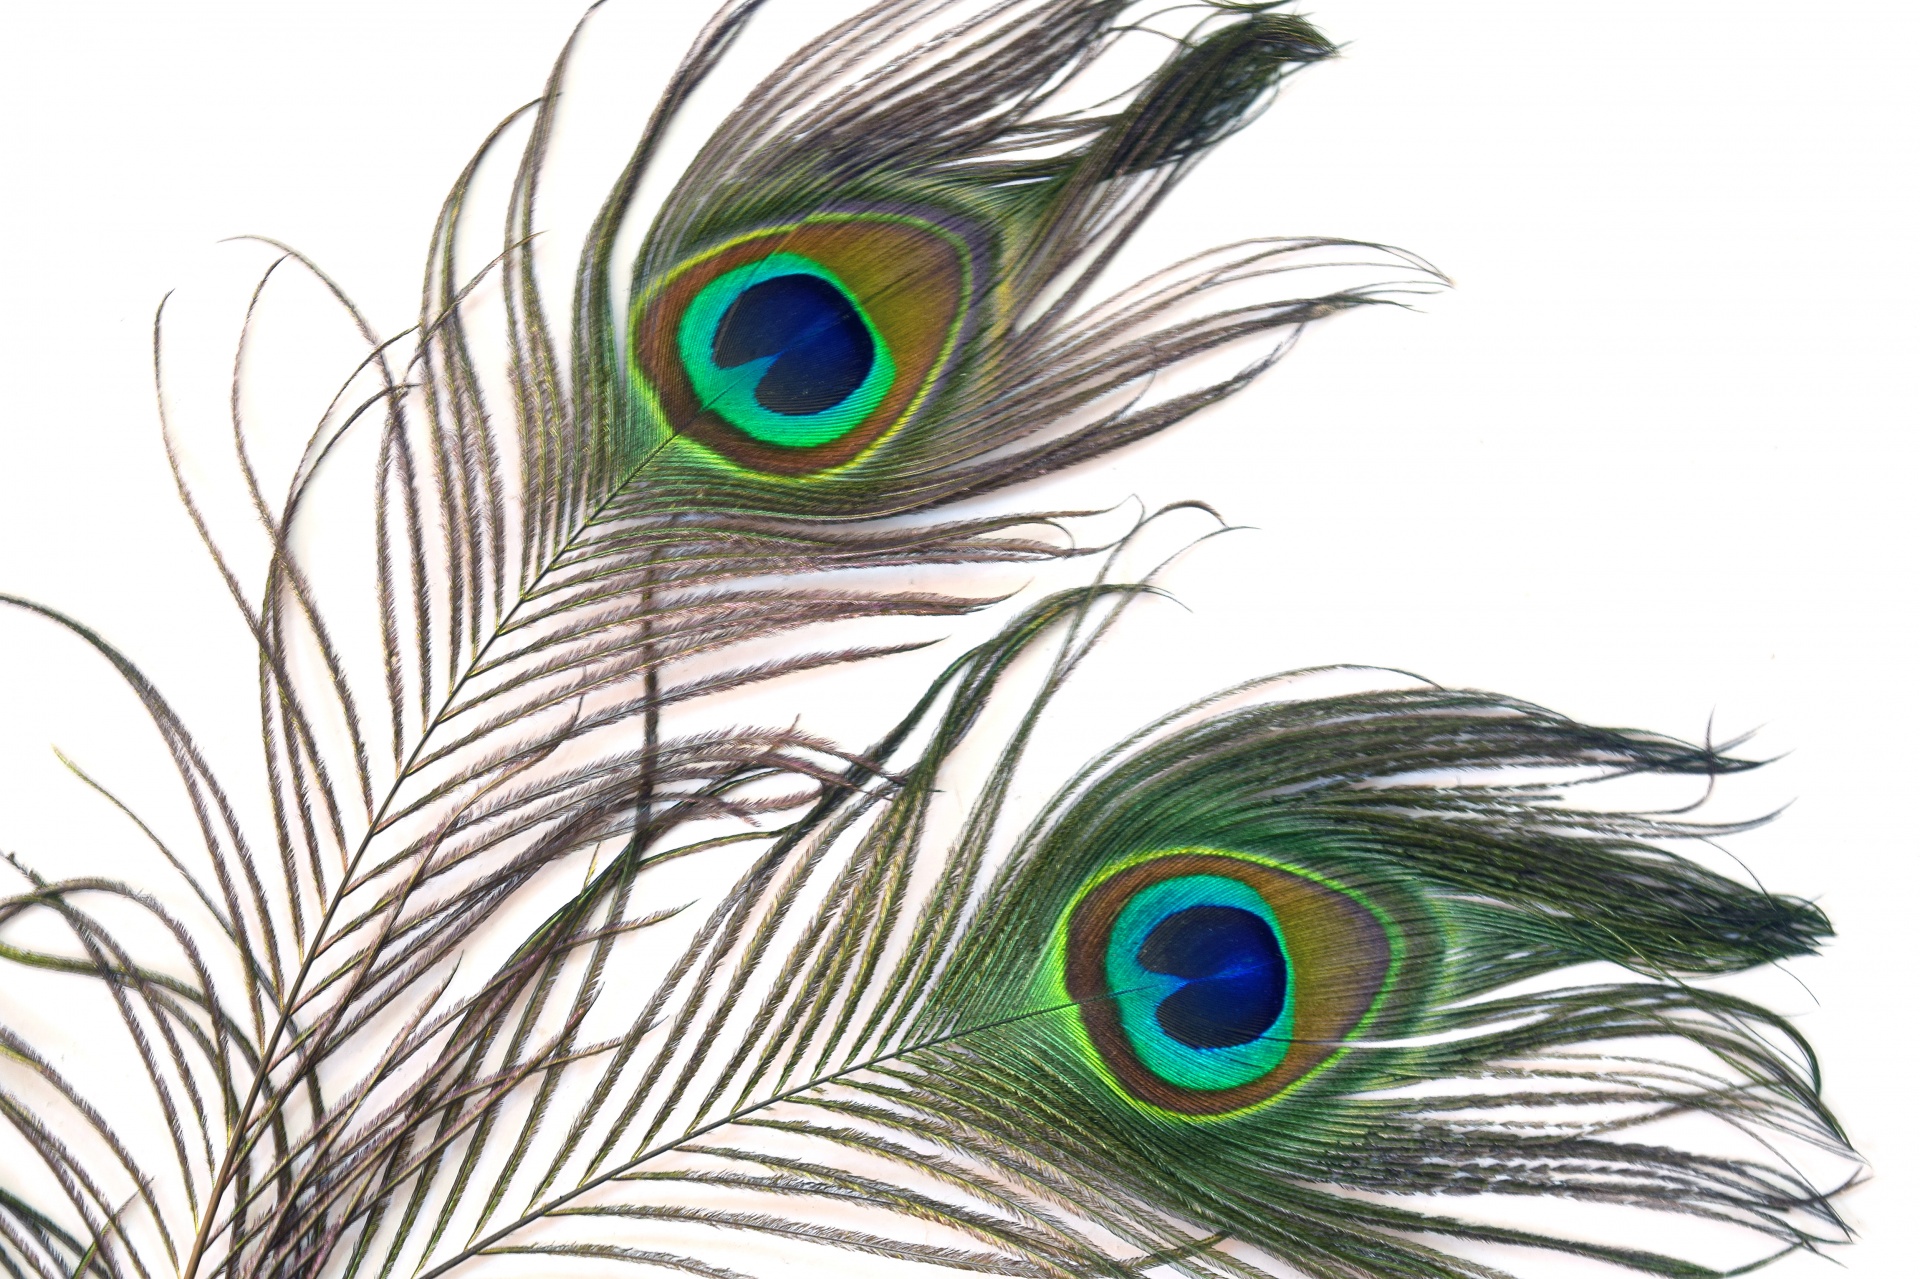 Peacock feathers photo